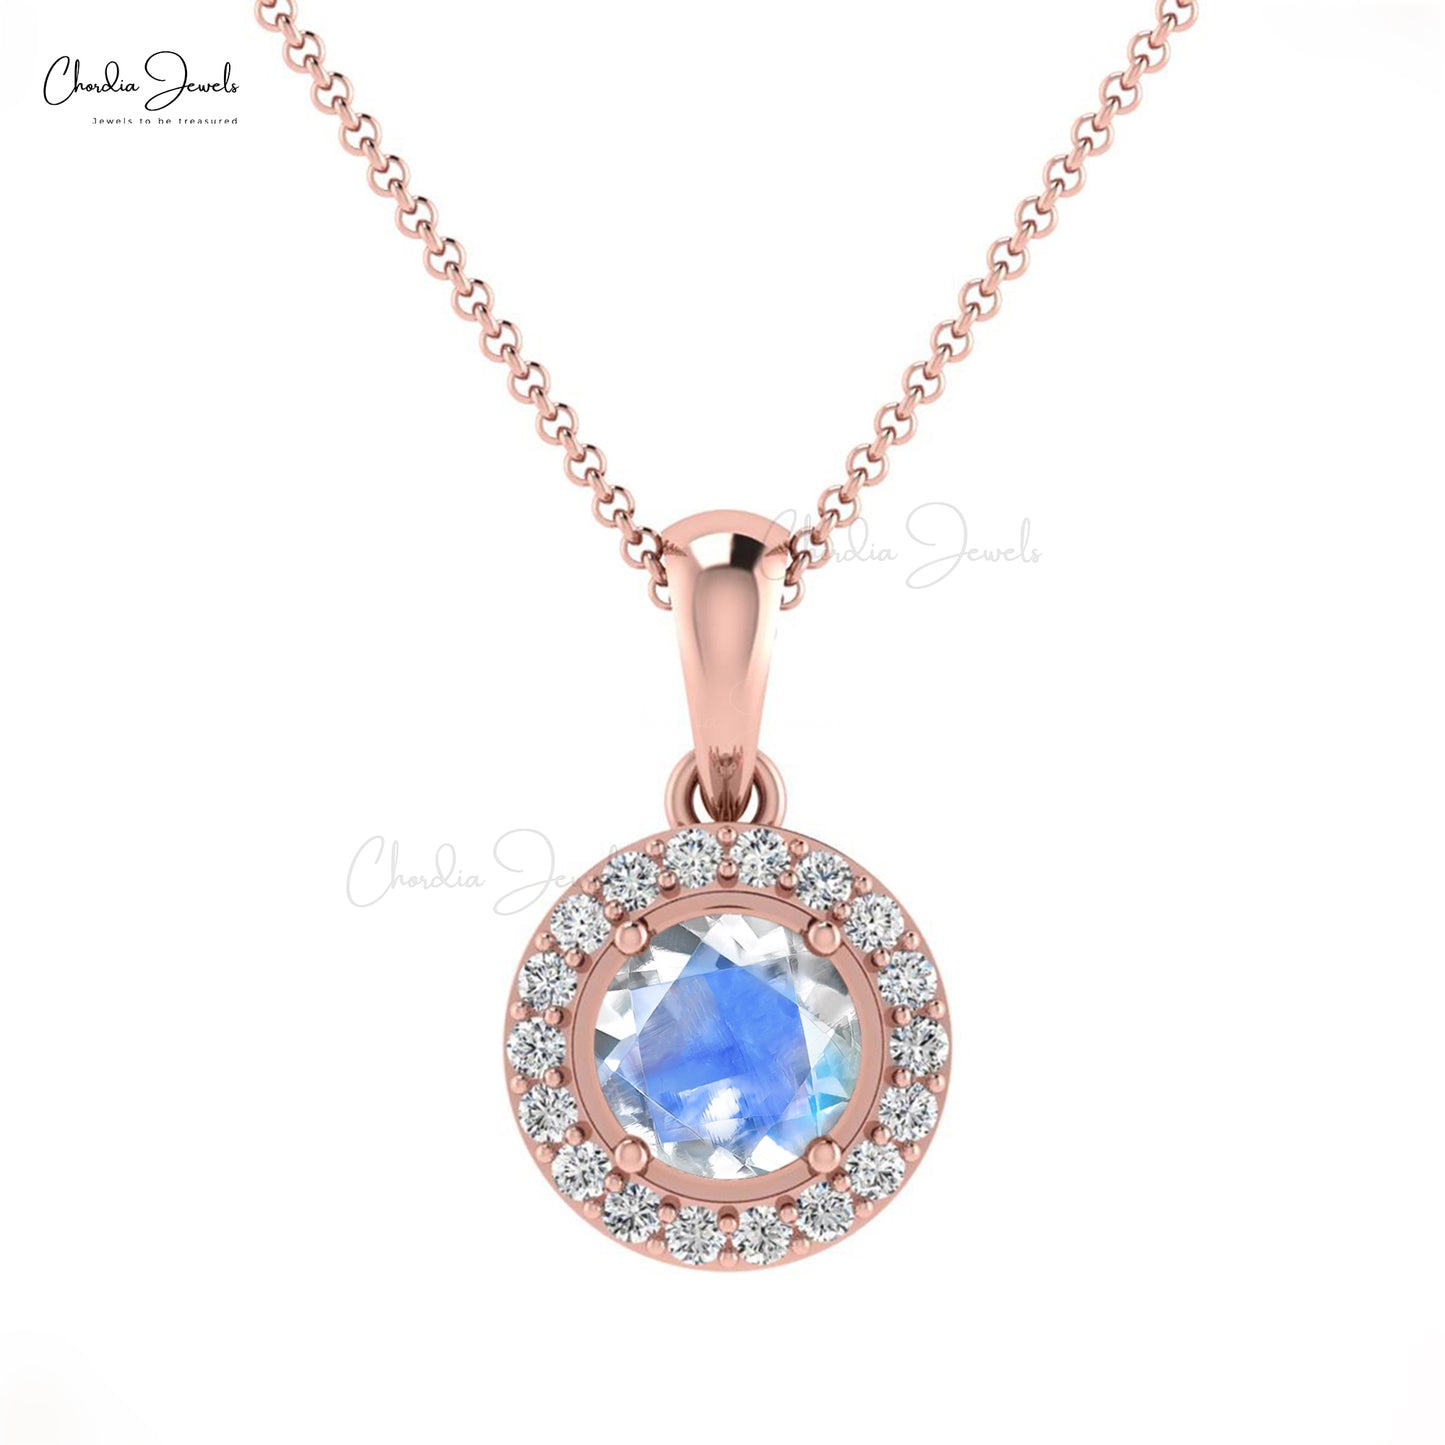 Customize Halo Style Natural Rainbow Moonstone and White Diamond Halo Pendant Necklace For Her 14k Pure Gold Light Weight Jewelry Wedding Gift